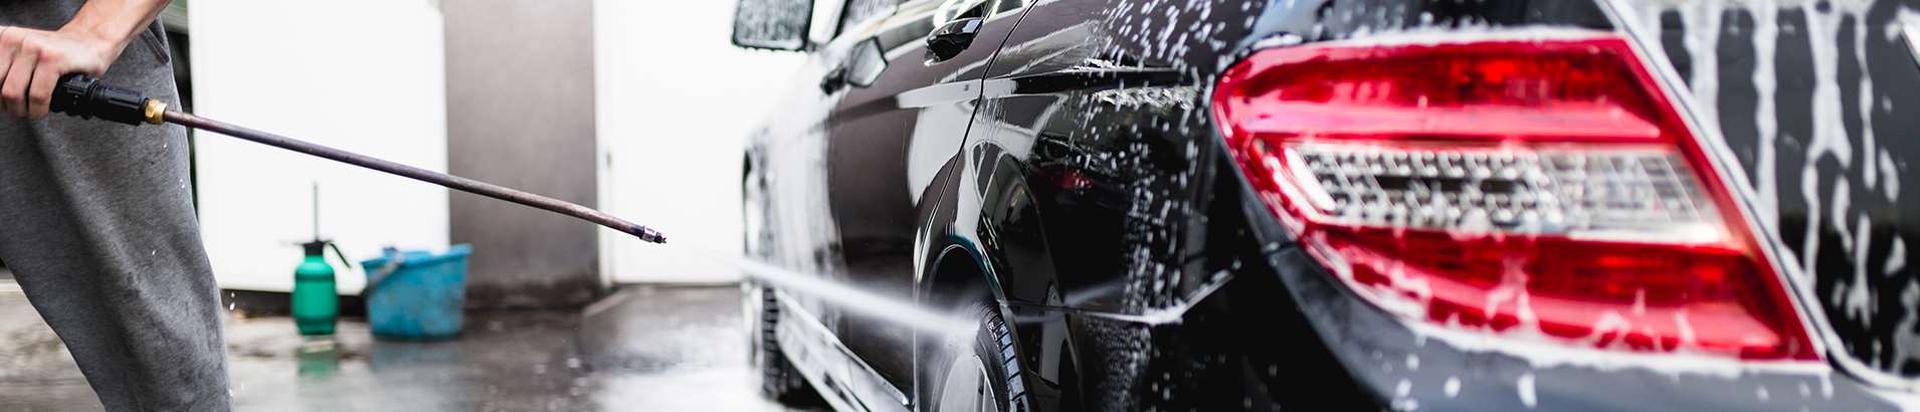 car wash, self service, and other related services, products, consultations